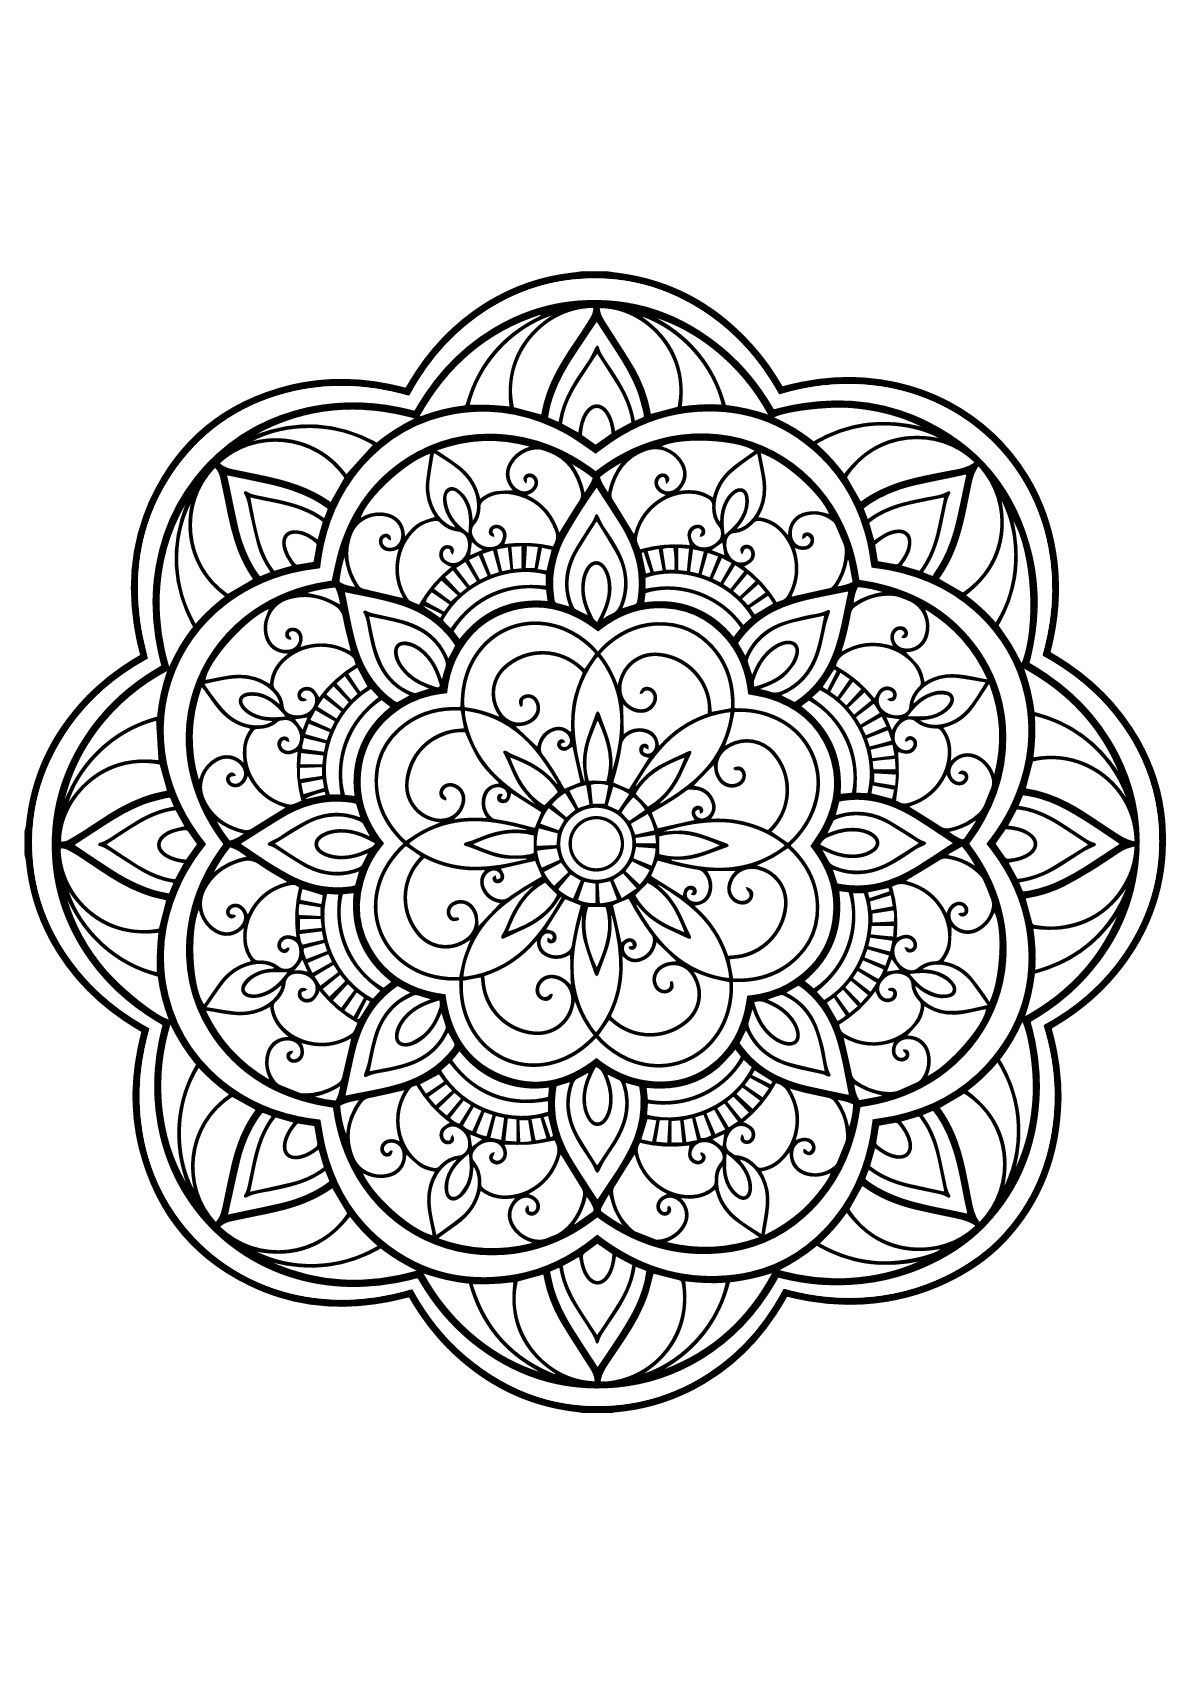 Download Mandala from free coloring books for adults 14 - Mandalas Adult Coloring Pages